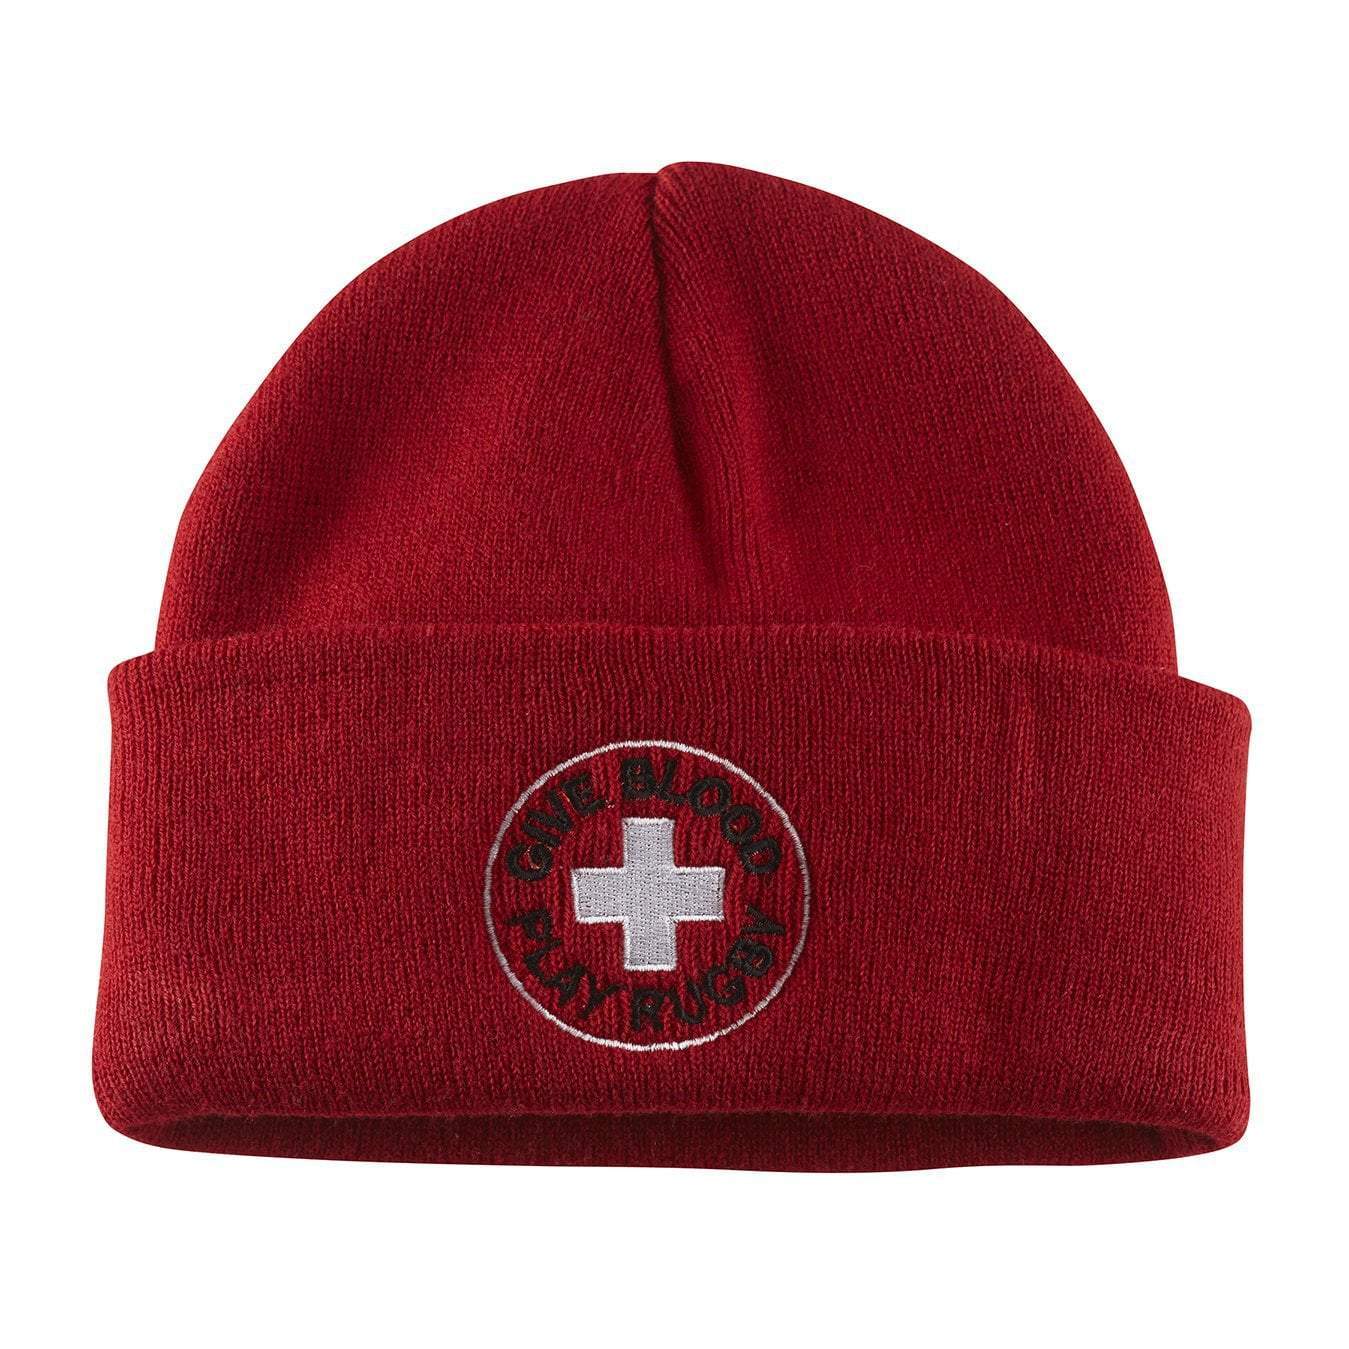 Rugby Imports Give Blood Play Rugby Cuffed Knit Cap